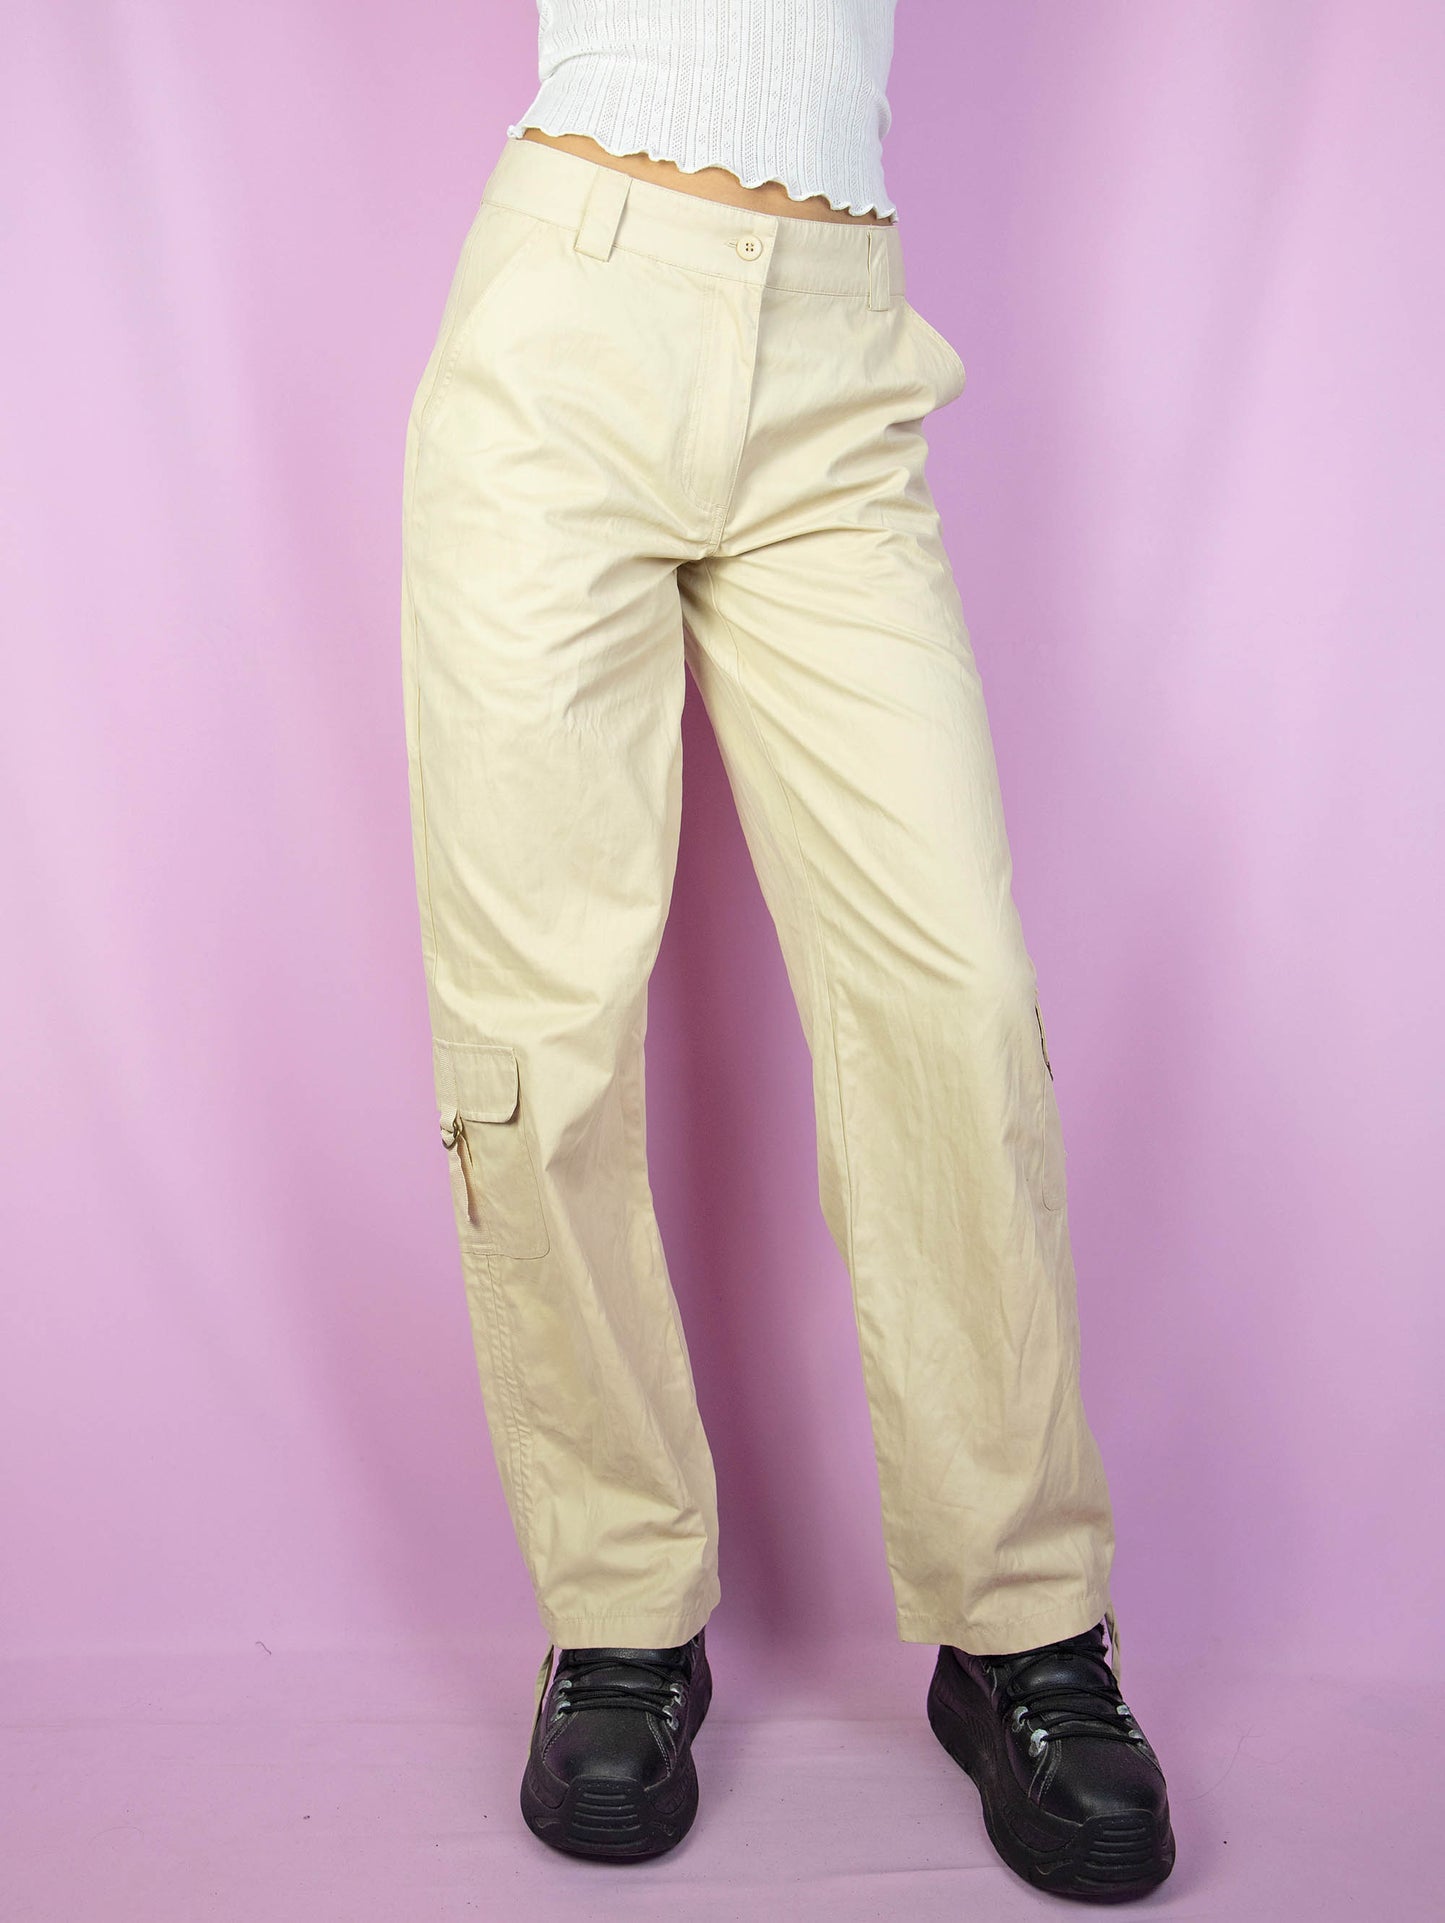 The Y2K Beige Cargo Pants are vintage mid-rise wide pants with pockets and a front zipper closure. Cyber grunge 2000s utility trousers.